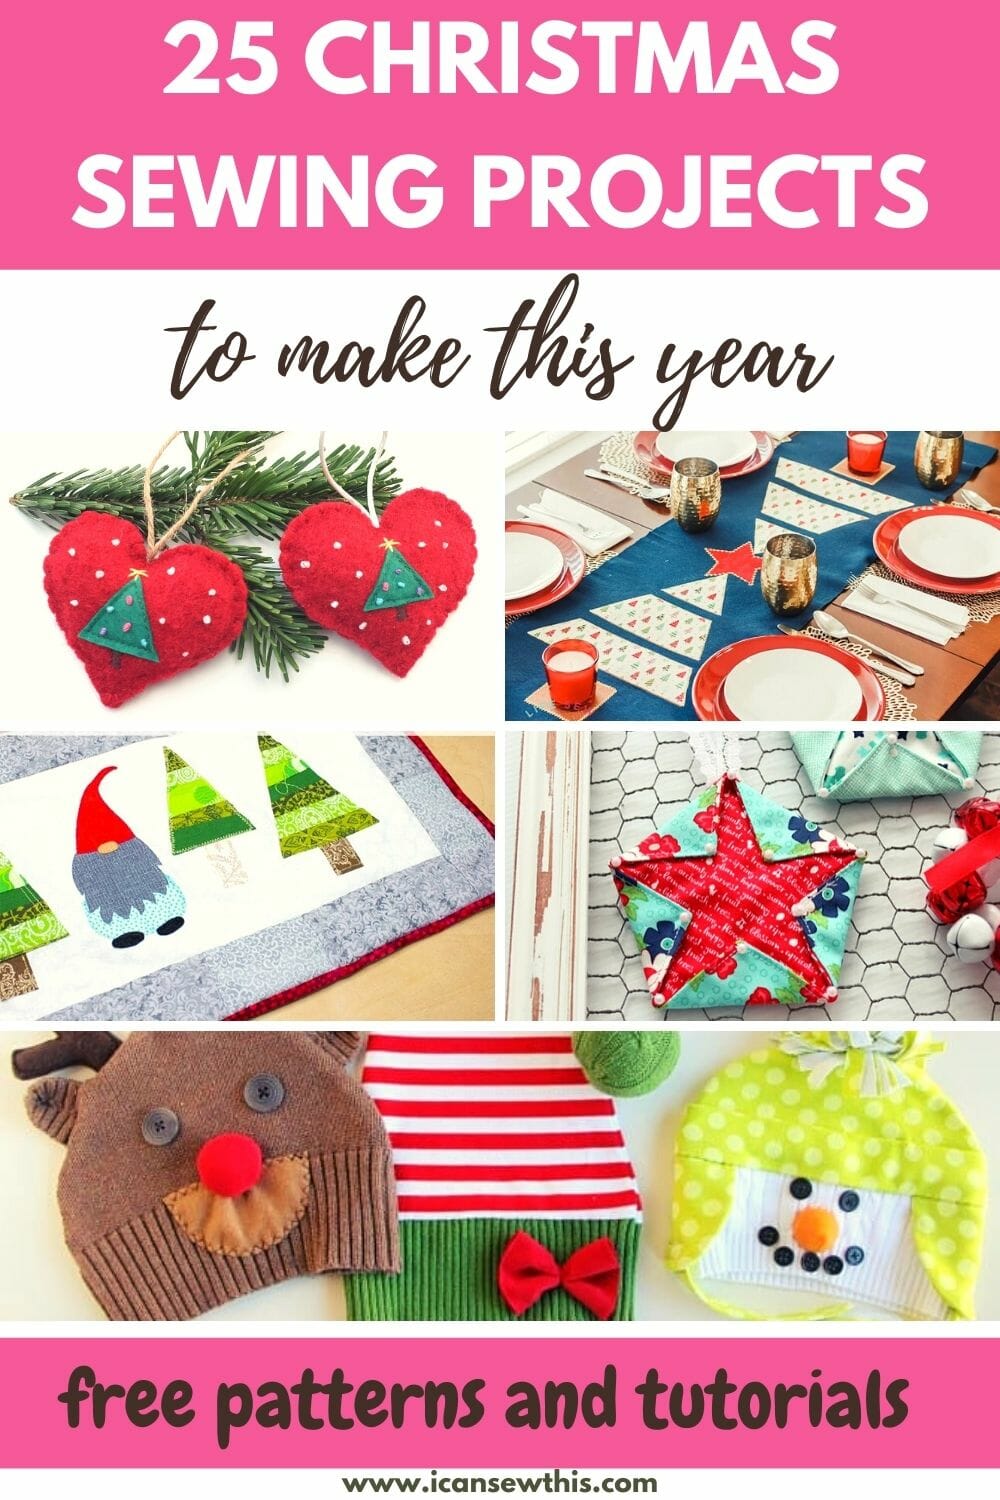 21+ Fun and Easy Christmas Gifts to Sew for Kids - MindyMakes